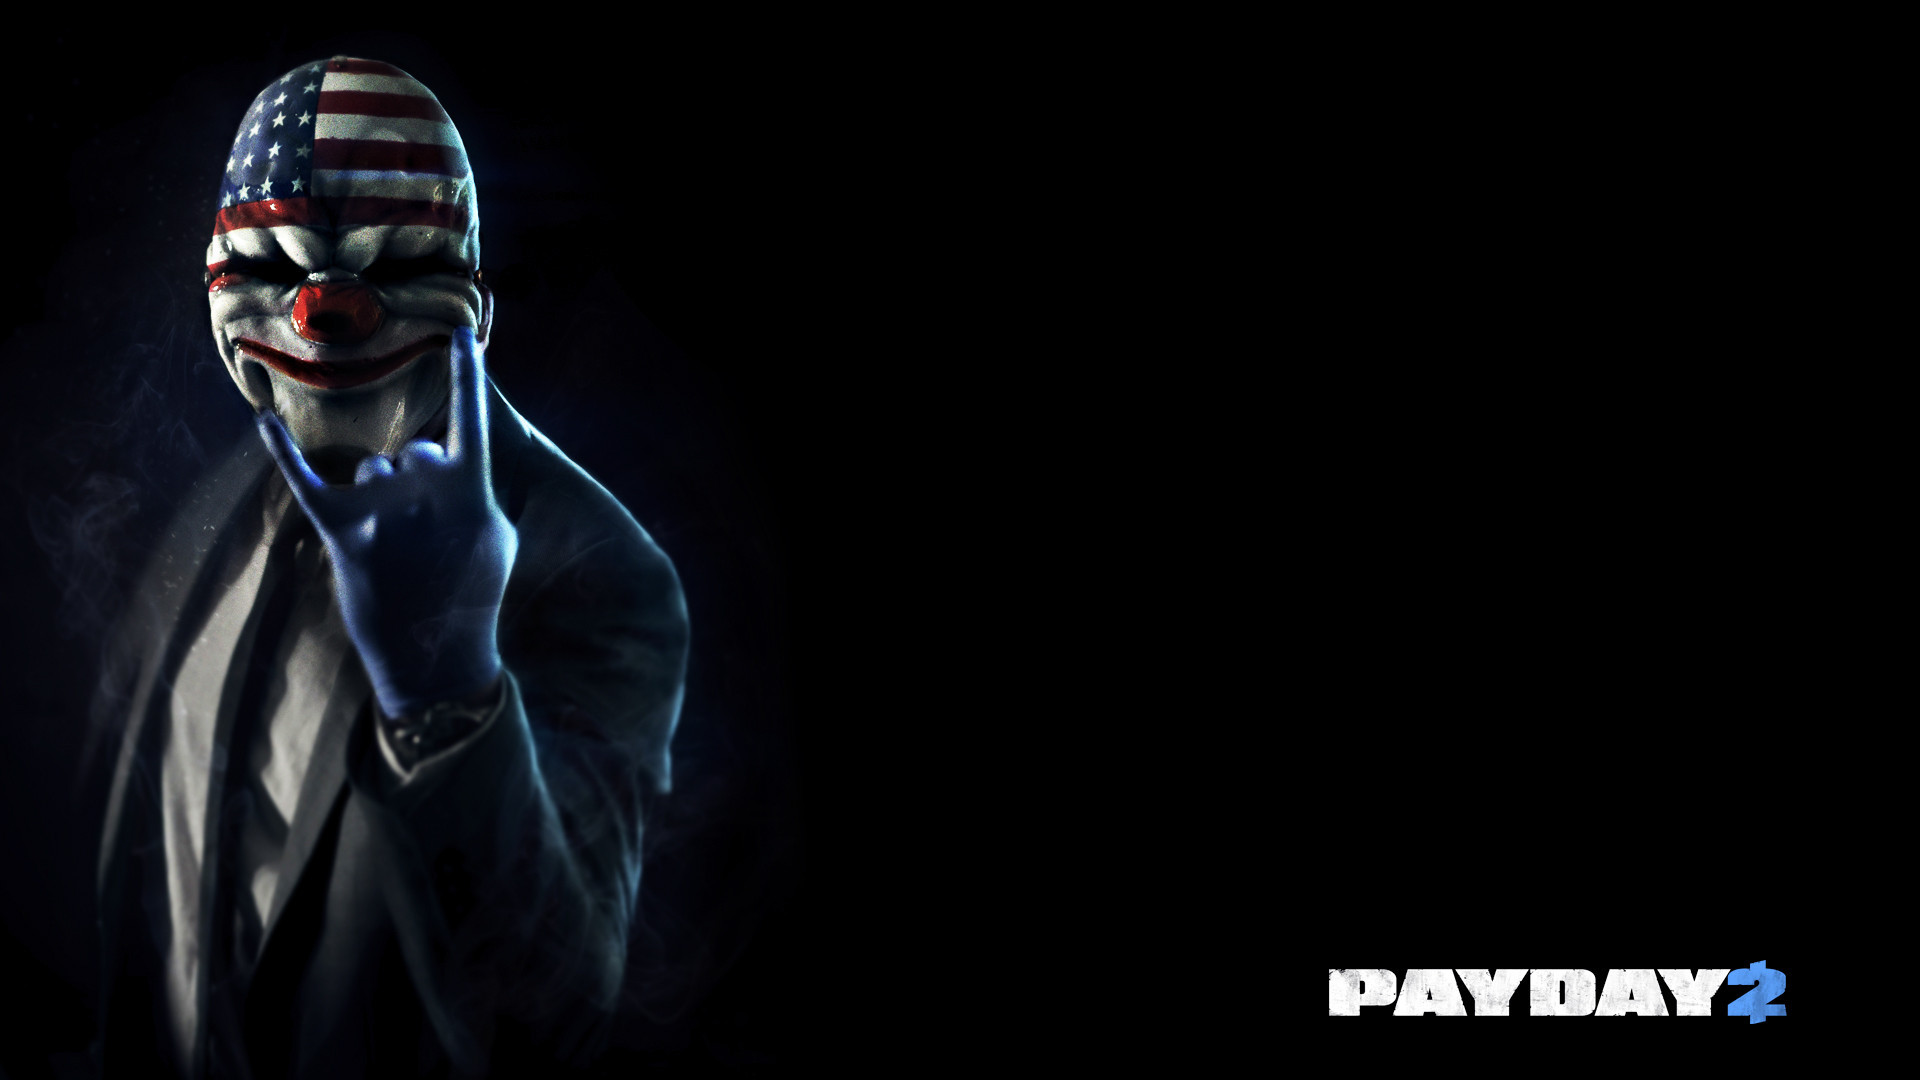 1920x1080 ... Download Wallpaper 640x960 Payday 2, Chains, Overkill software .